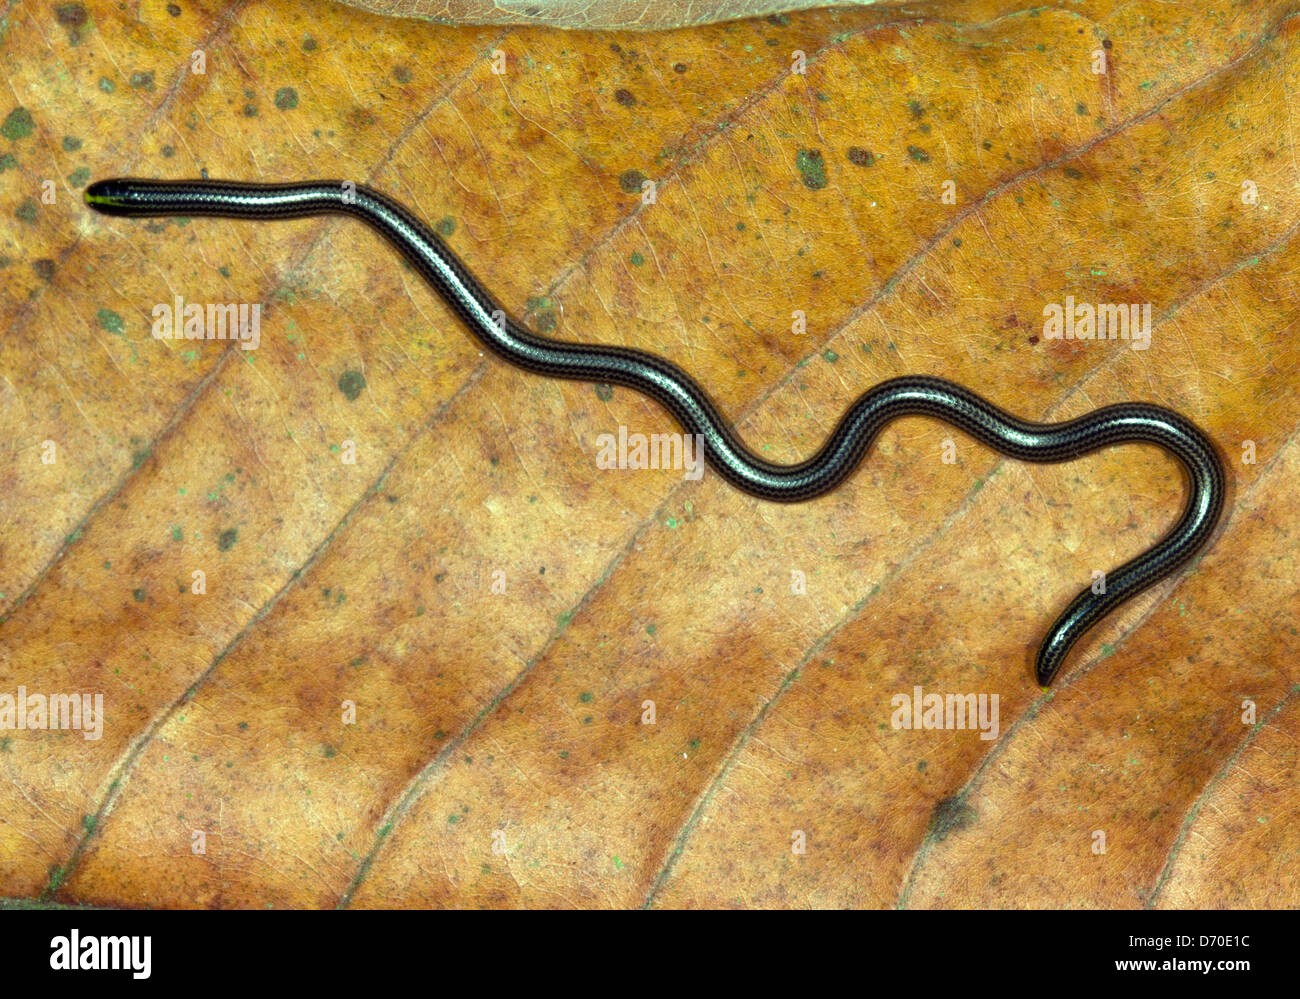 Thread Snake (Leptotyphlops sp.) from southern Ecuador. A very tiny snake only a couple of inches long Stock Photo